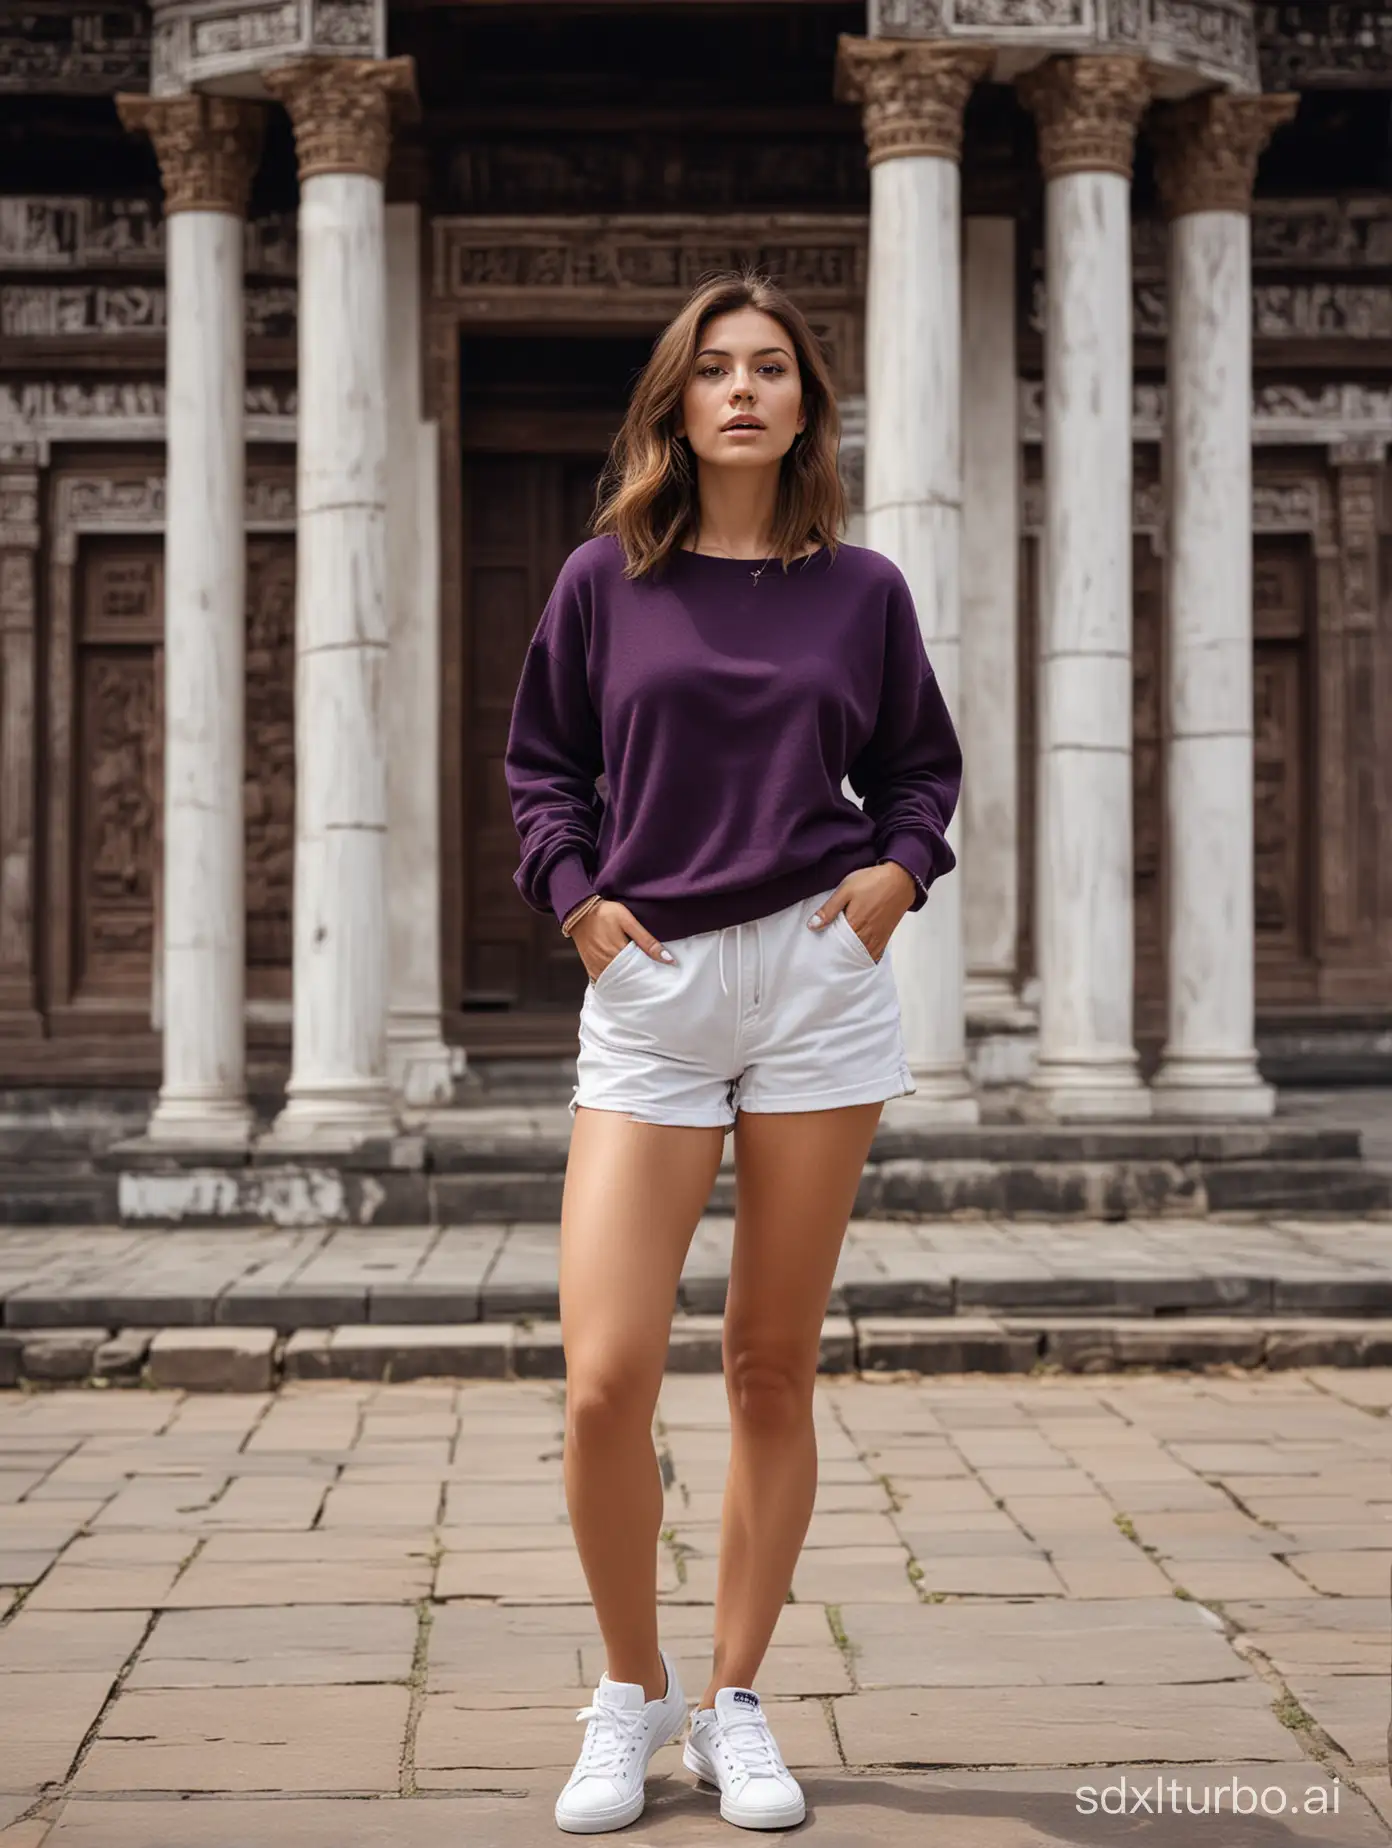 medium brown haired woman, slim body, small breast, wearing a dark purple sweater, wearing white short pants, wearing white sneakers, standing in front of a temple, in an open space, realistic, full body head to toe